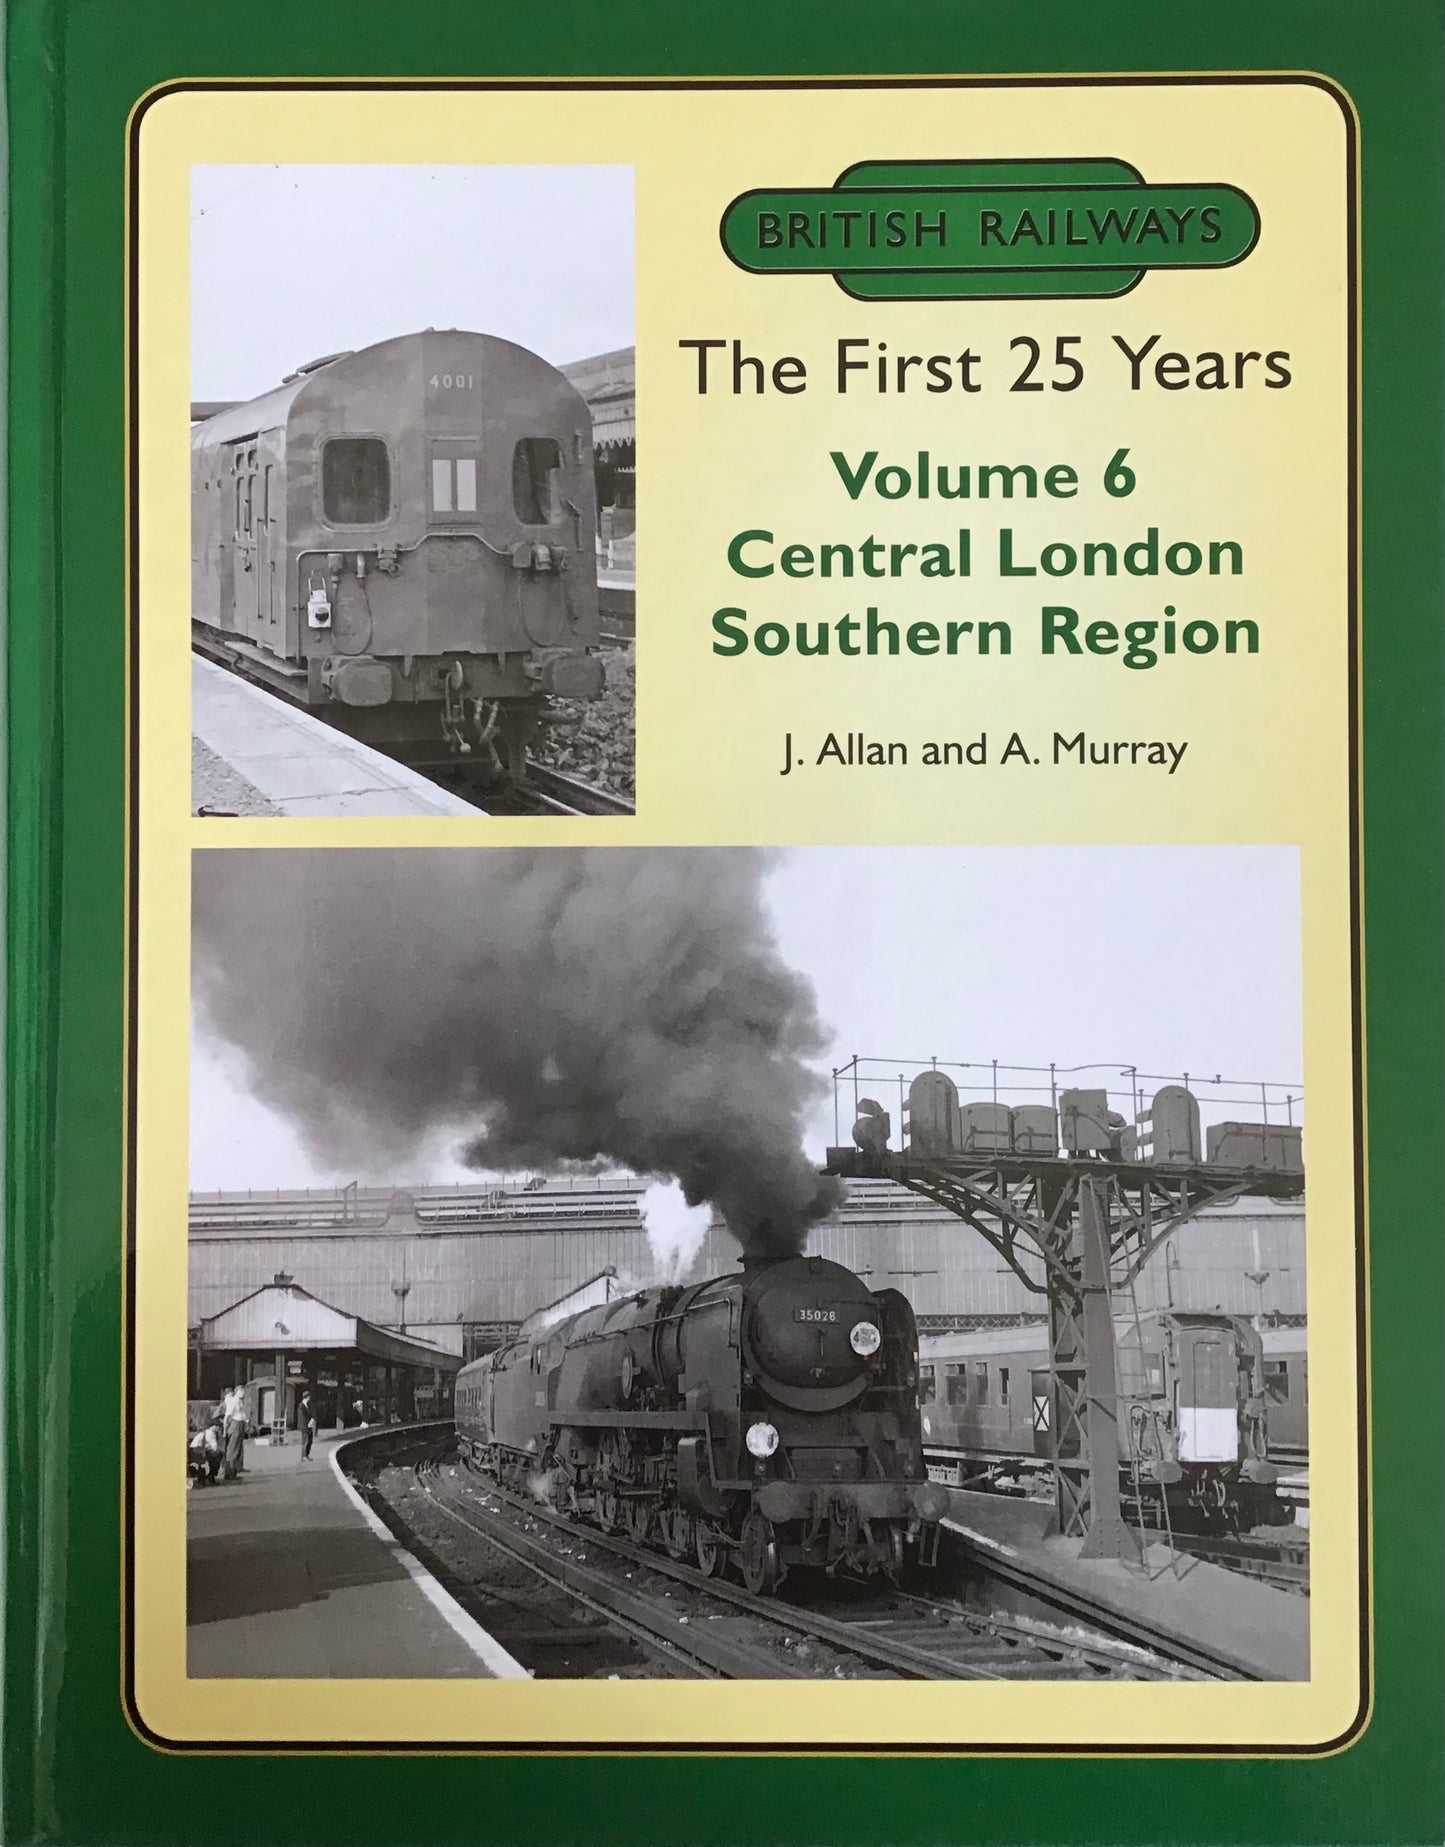 British Railways The First 25 Years Volume 6 Central London Sothern - Chester Model Centre